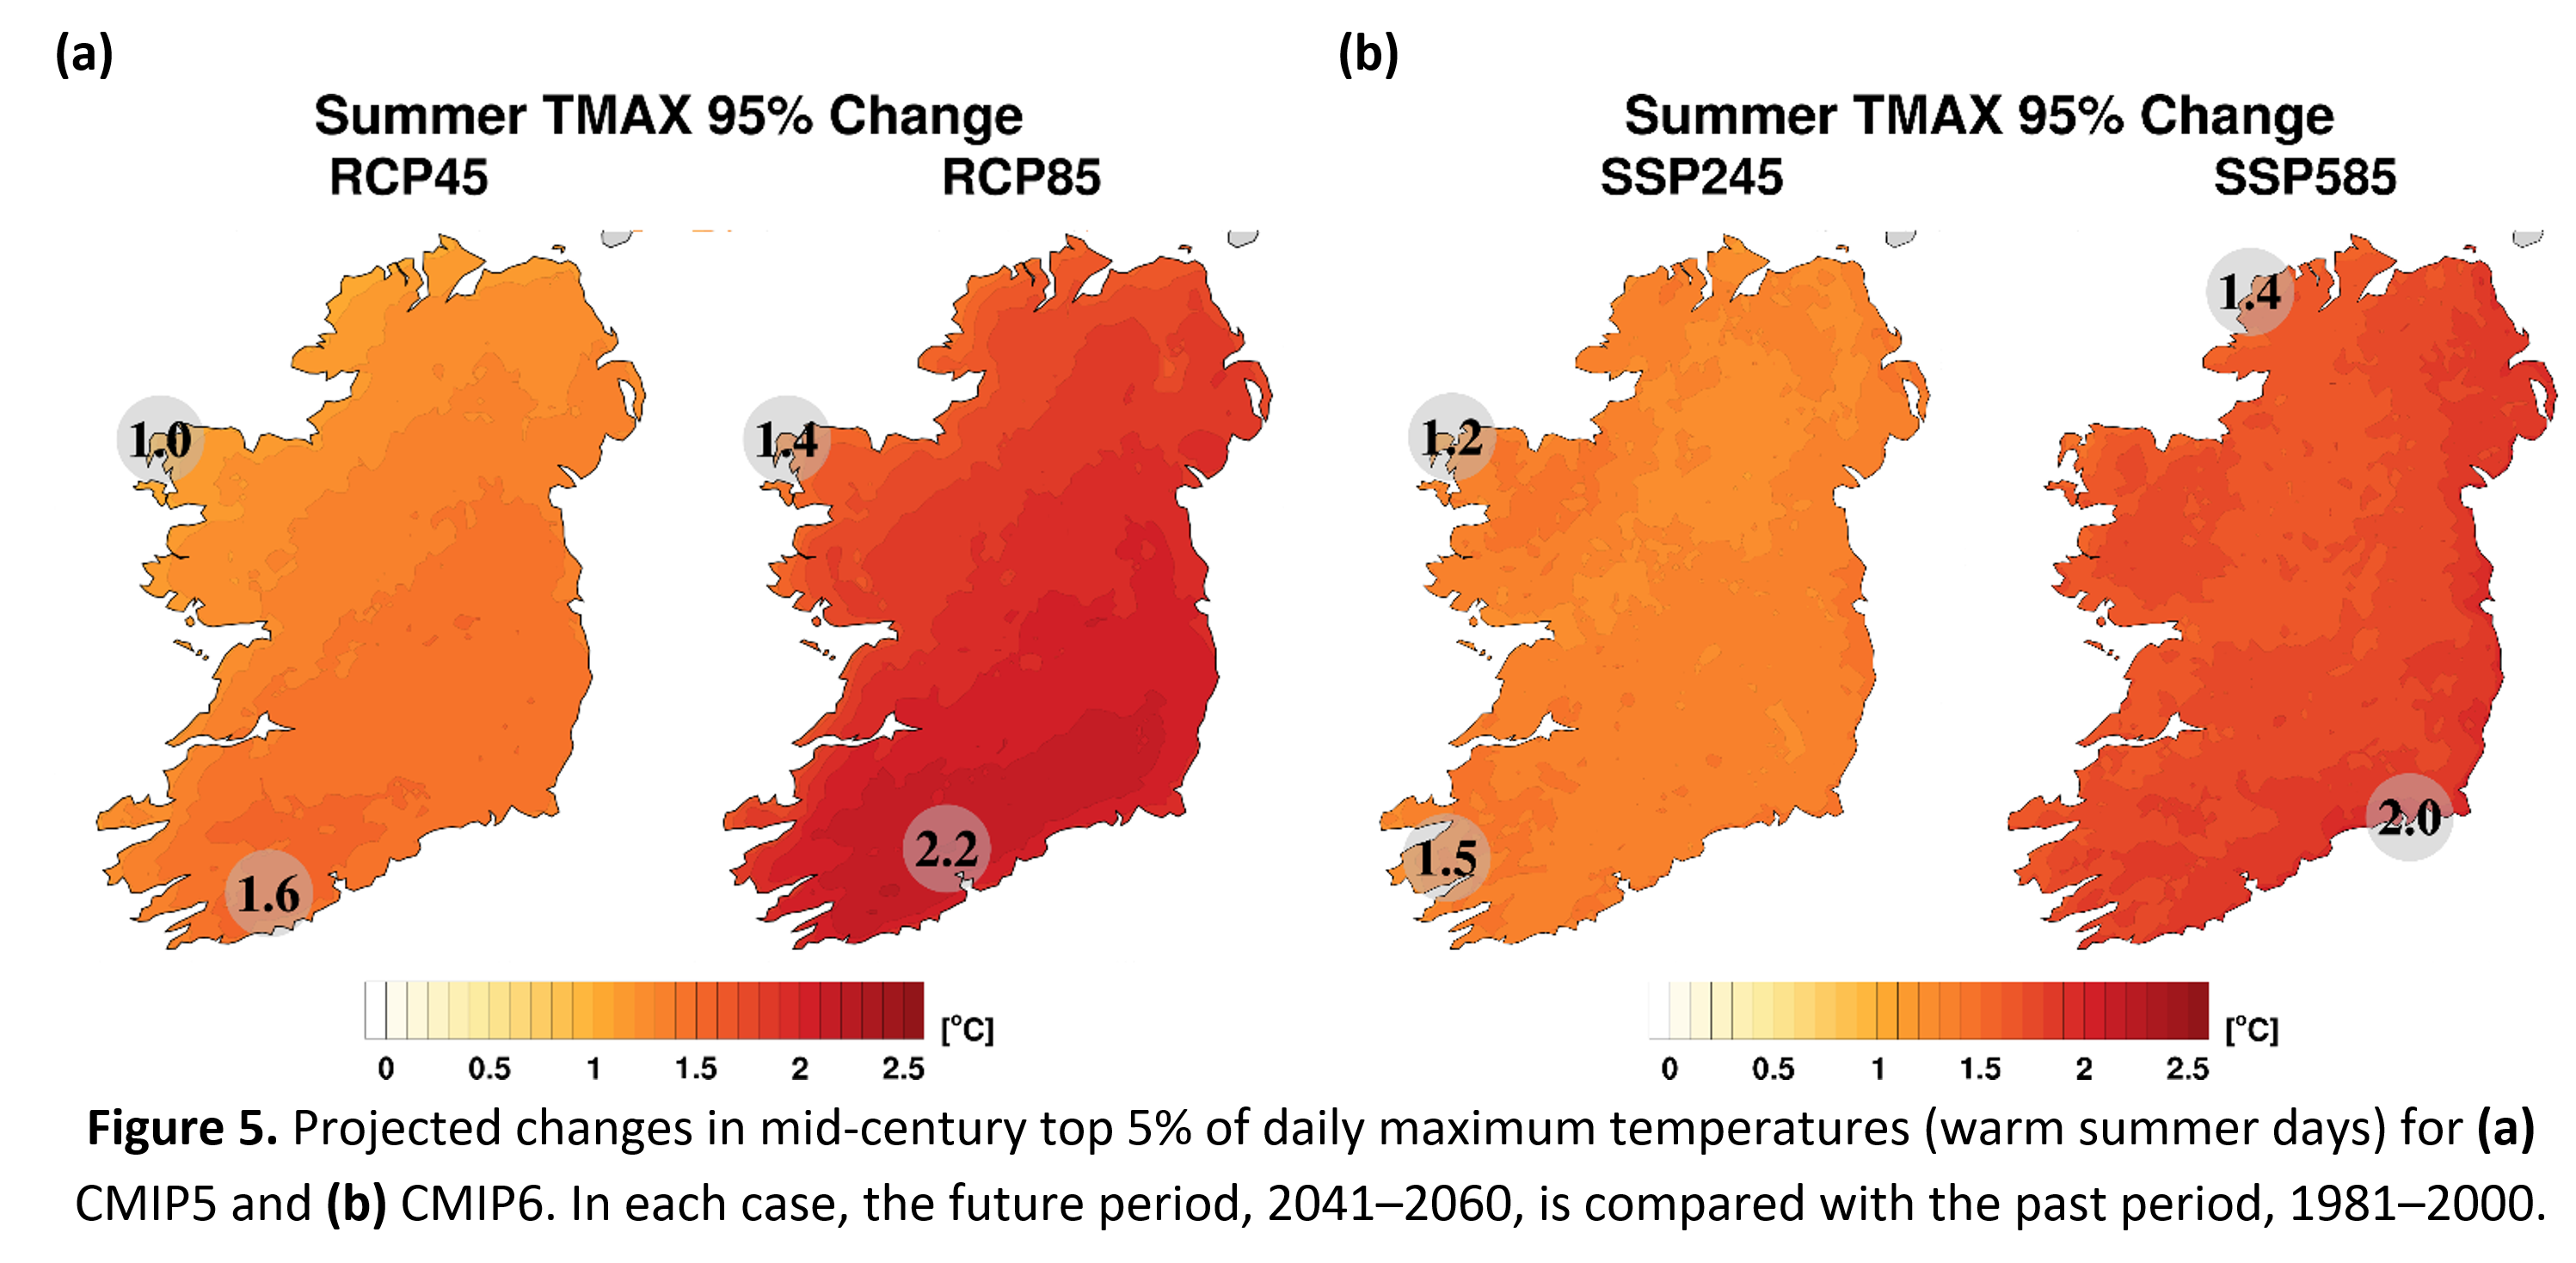 Figure 5. Projected changes in mid-century top 5% of daily maximum temperatures (warm summer days) for (a) CMIP5 and (b) CMIP6. In each case, the future period, 2041–2060, is compared with the past period, 1981–2000.